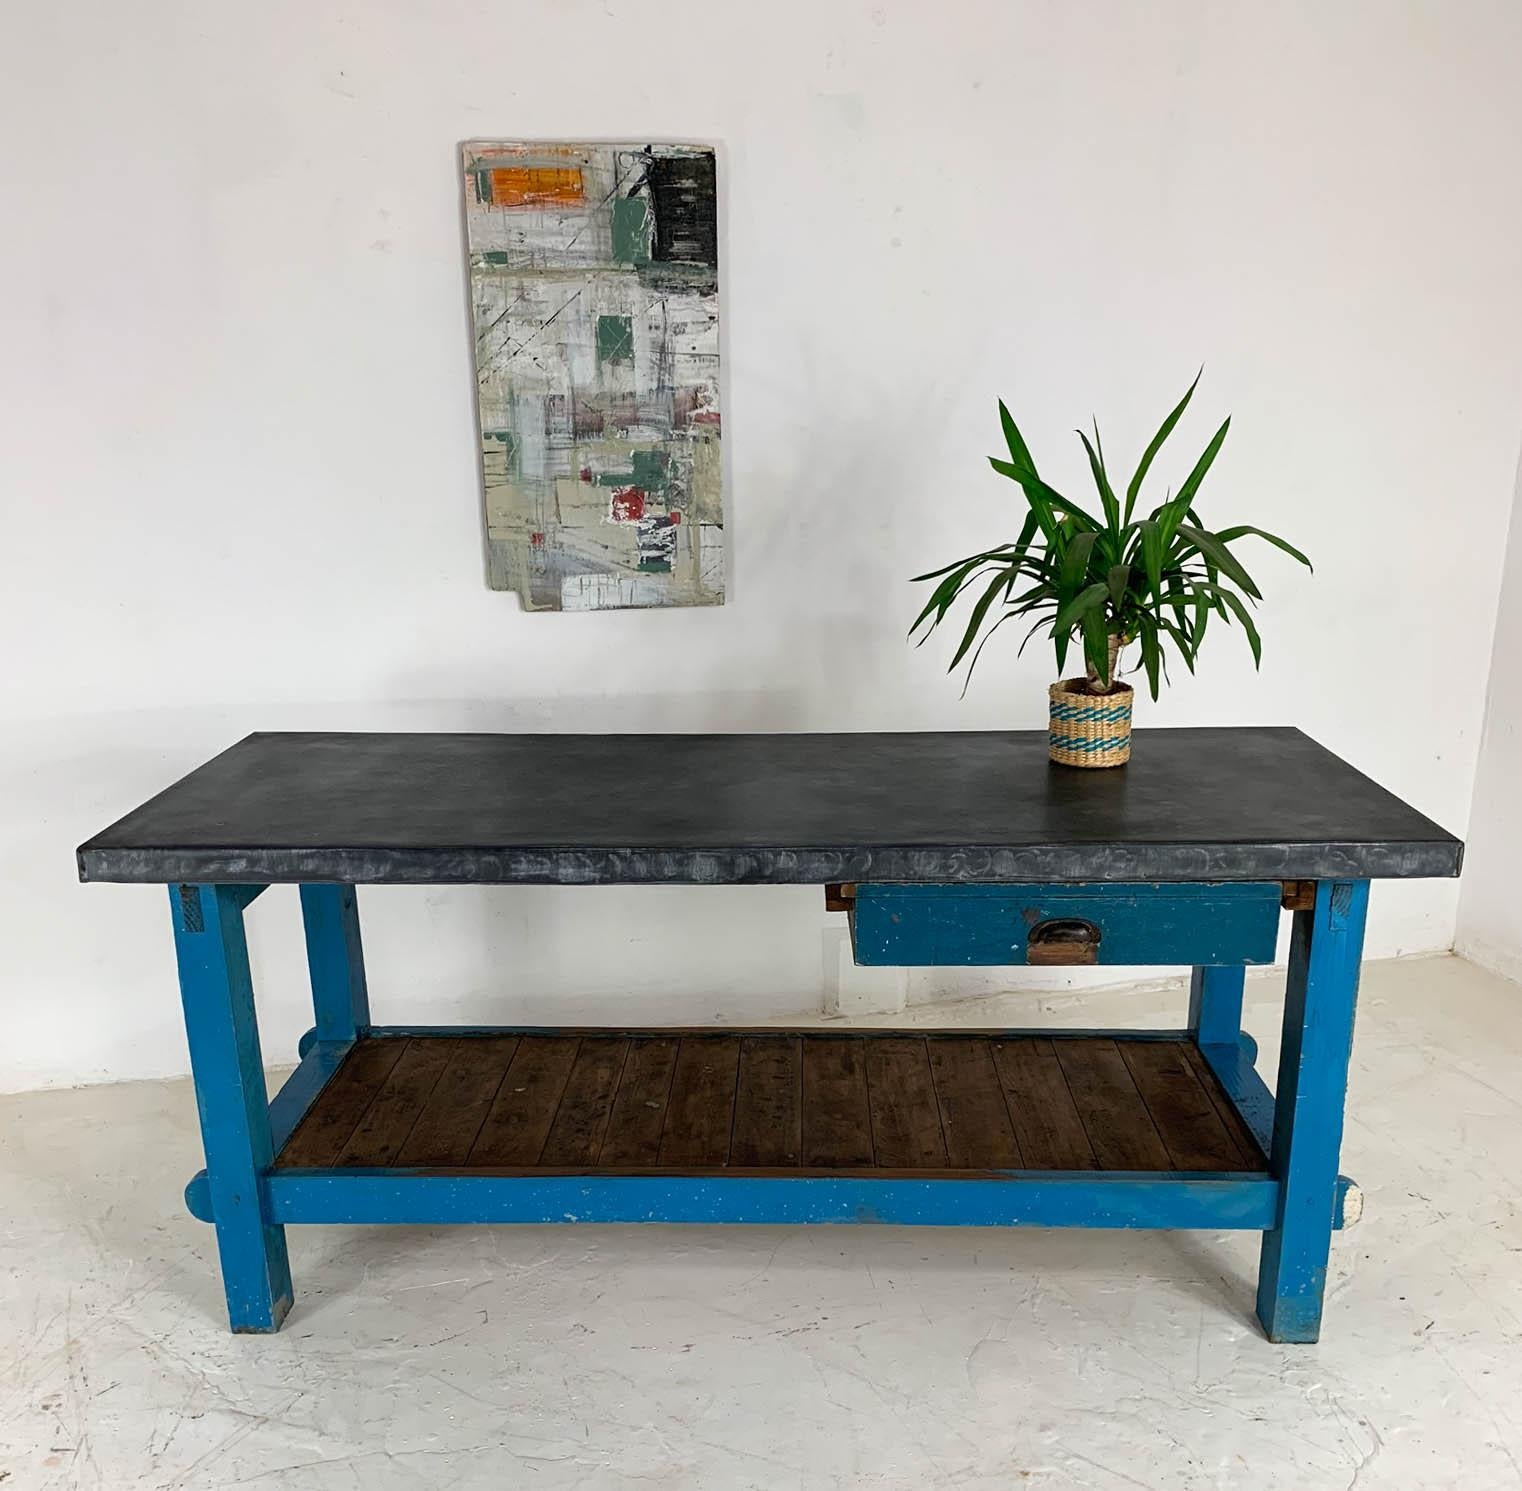 Mid-20th century workbench sourced from a carpenter's workshop in Lincoln. We have added a beautifully aged zinc top which makes an ideal kitchen surface due to it's antibacterial properties. The original blue paint has worn through in places, as